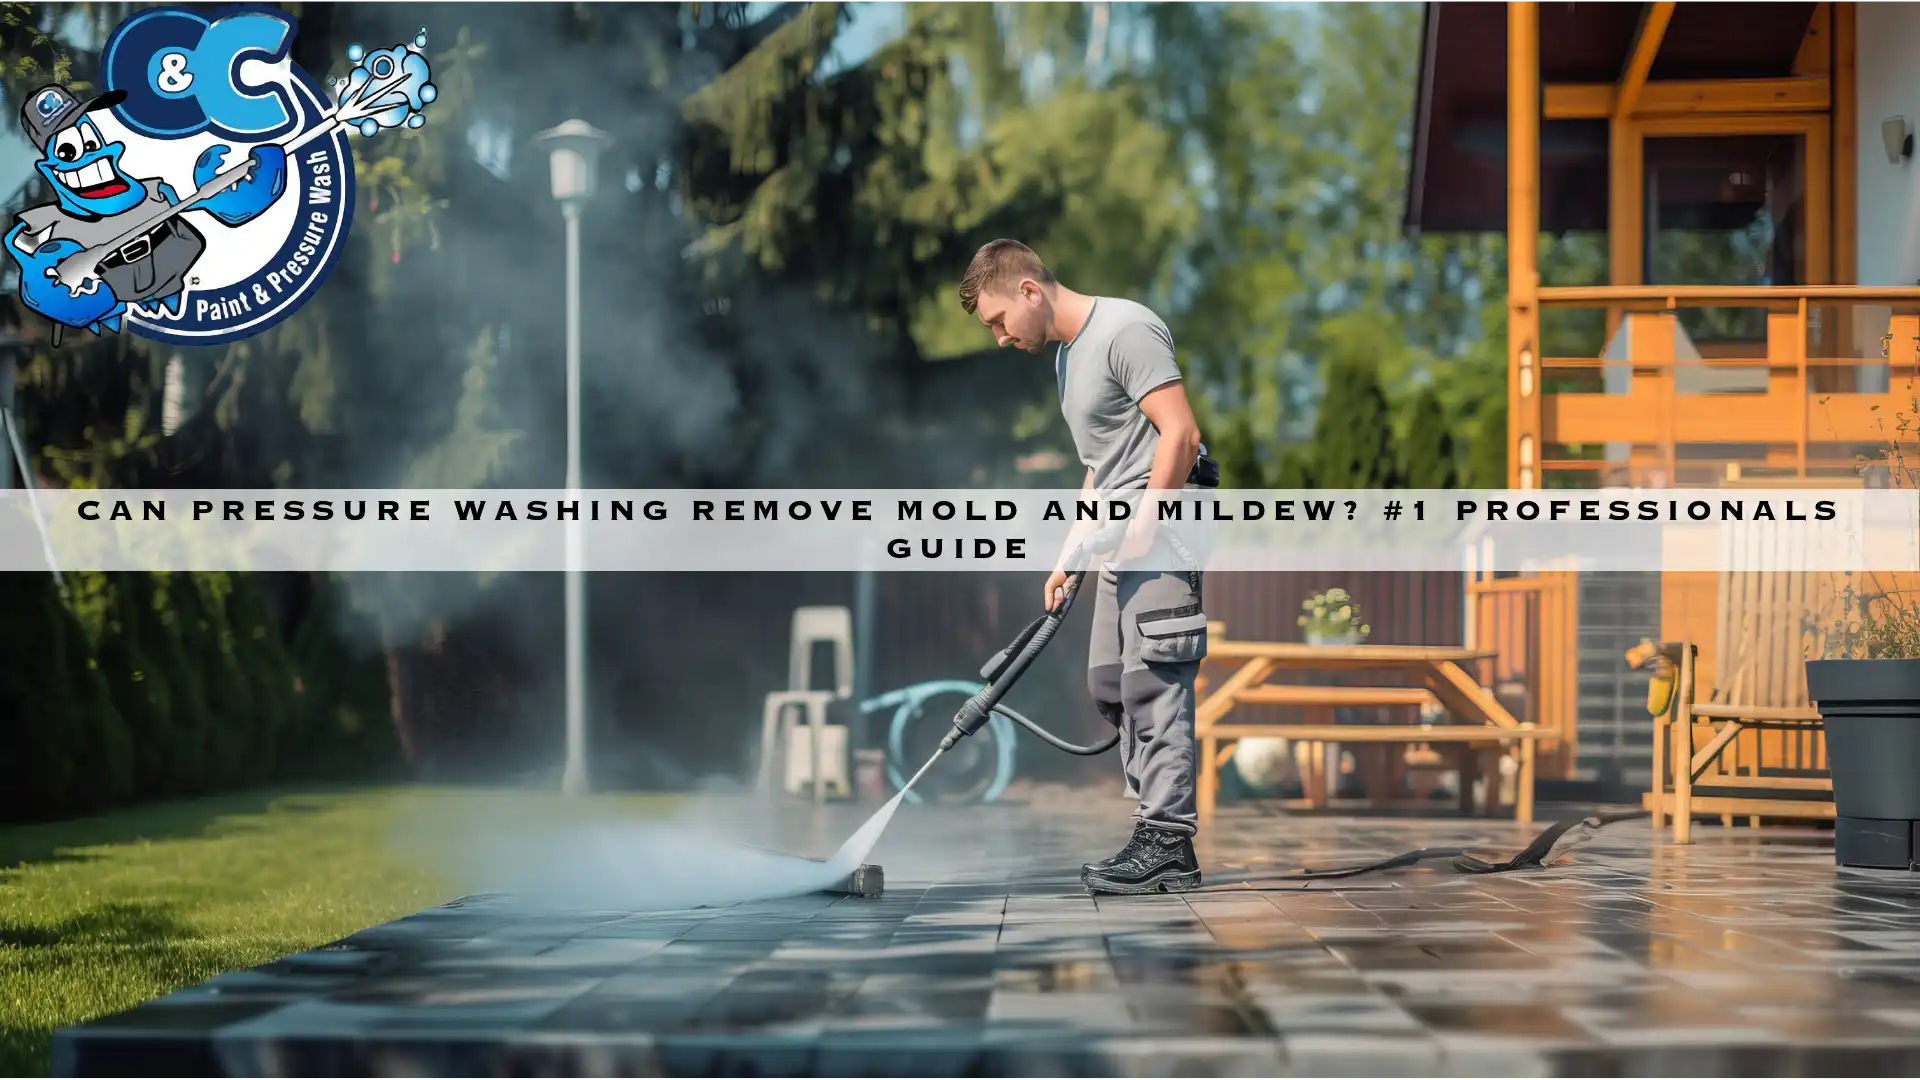 Can Pressure Washing Remove Mold And Mildew? #1 Professionals Guide